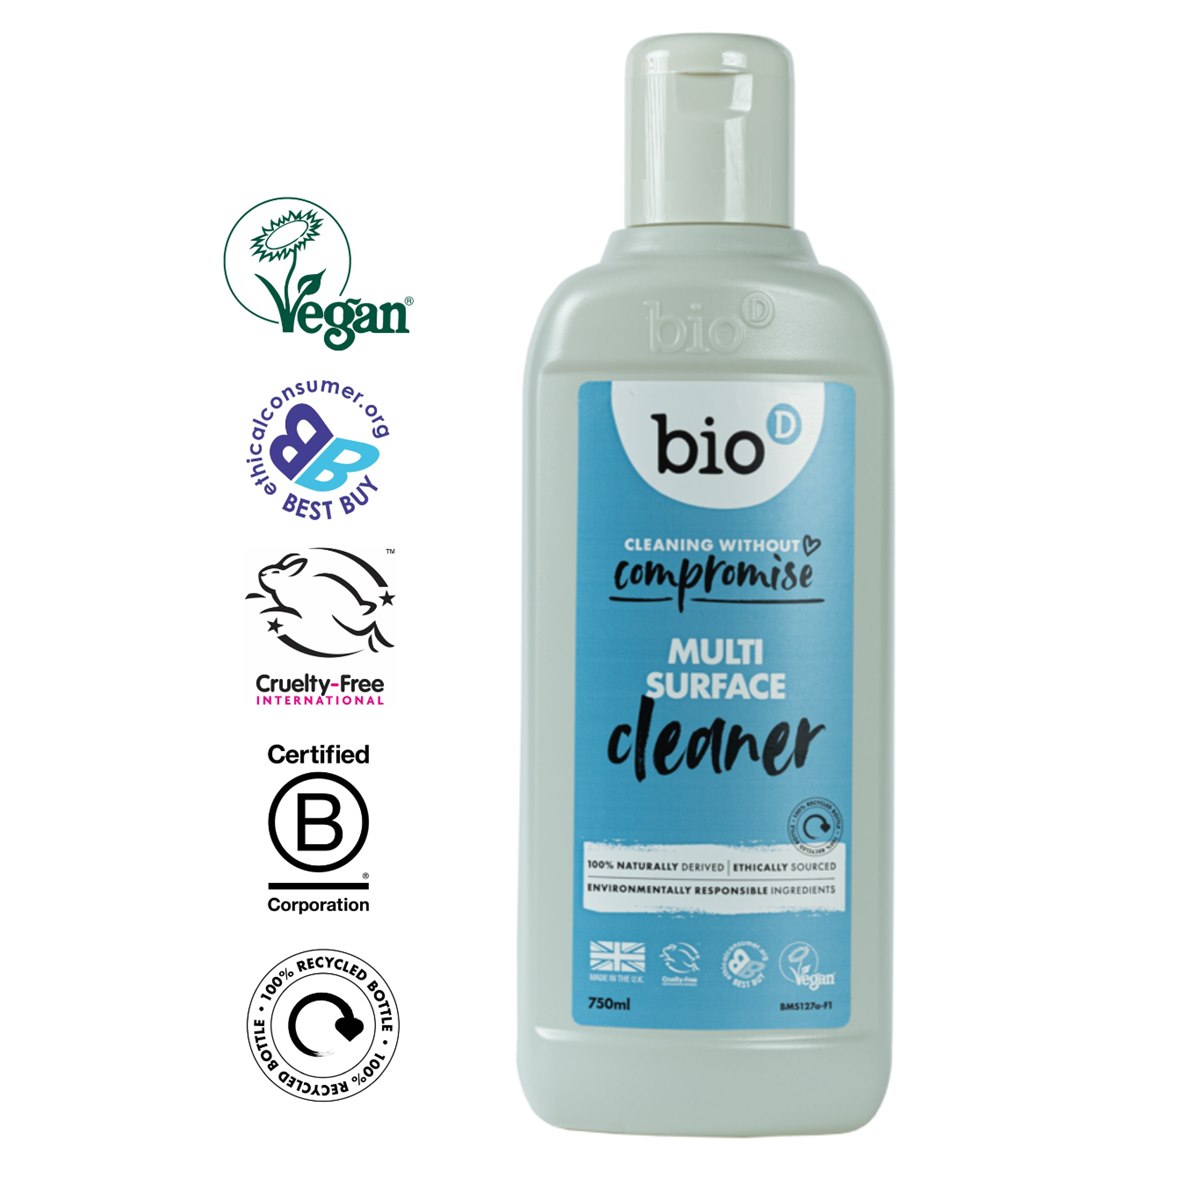 Bio-D-Multi-Surface-Cleaner